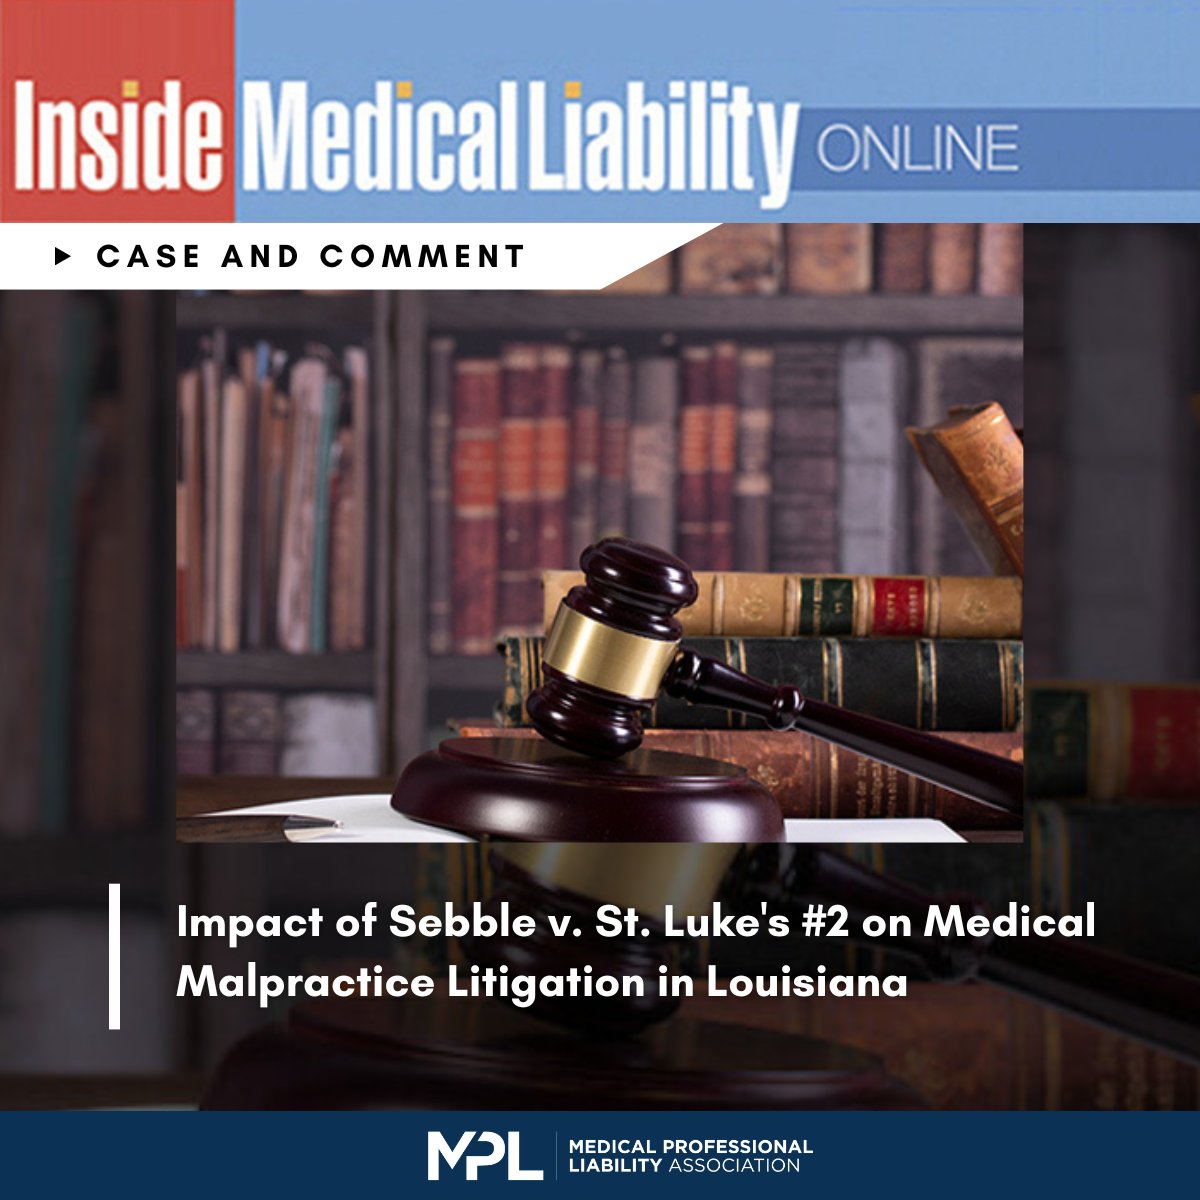 A decision from the Louisiana Supreme Court offers guidance for MPL cases post-pandemic, as well as for future litigation involving the issue of immunity of healthcare providers for malpractice occurring during a declared state of public emergency: bit.ly/3UCmfhV